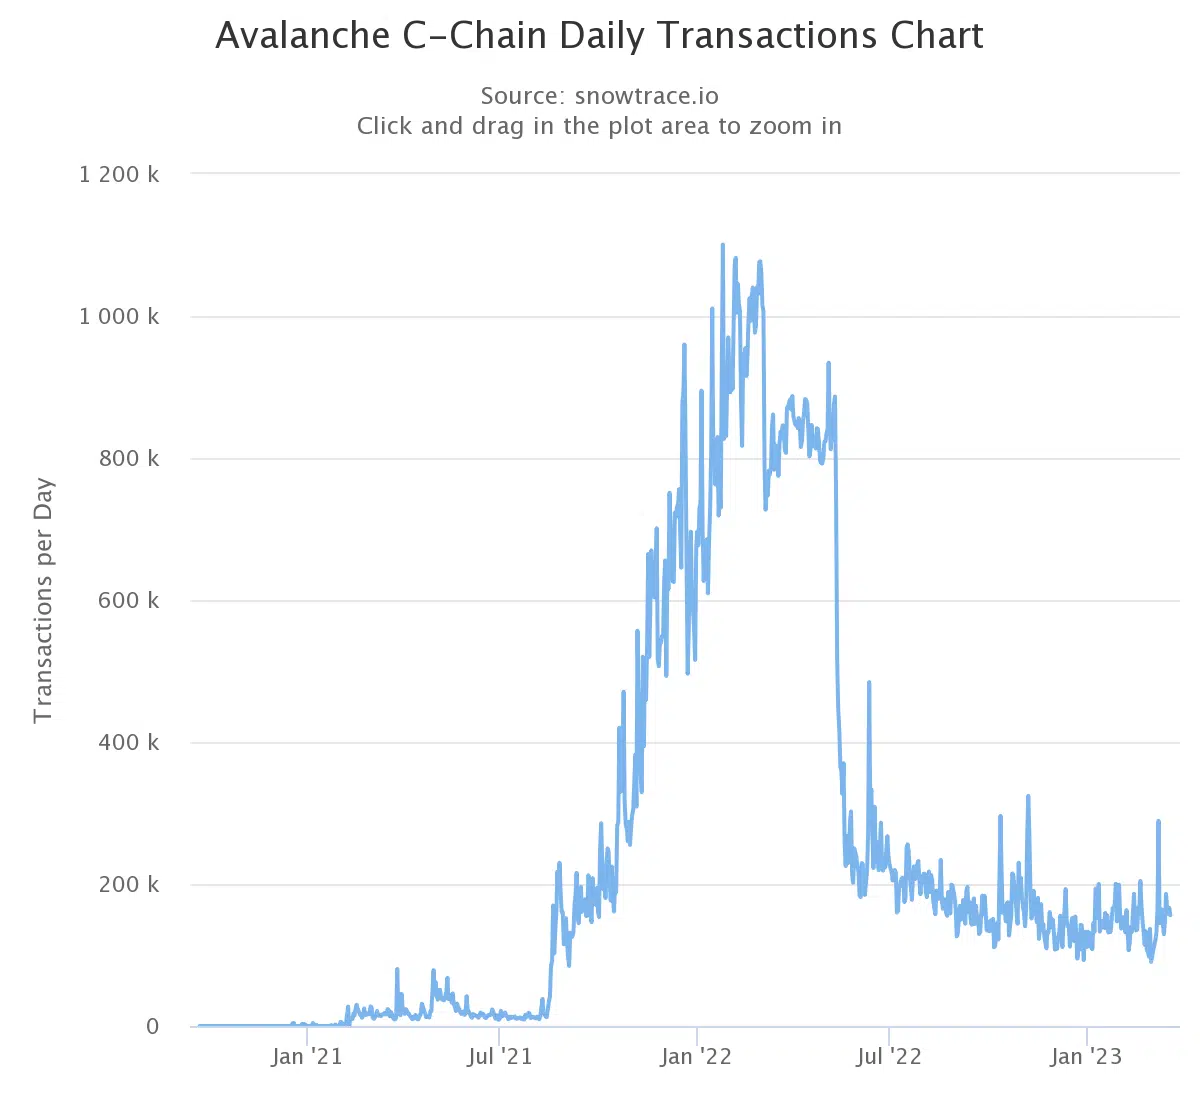 Avalanche C-chain daily transactions chart